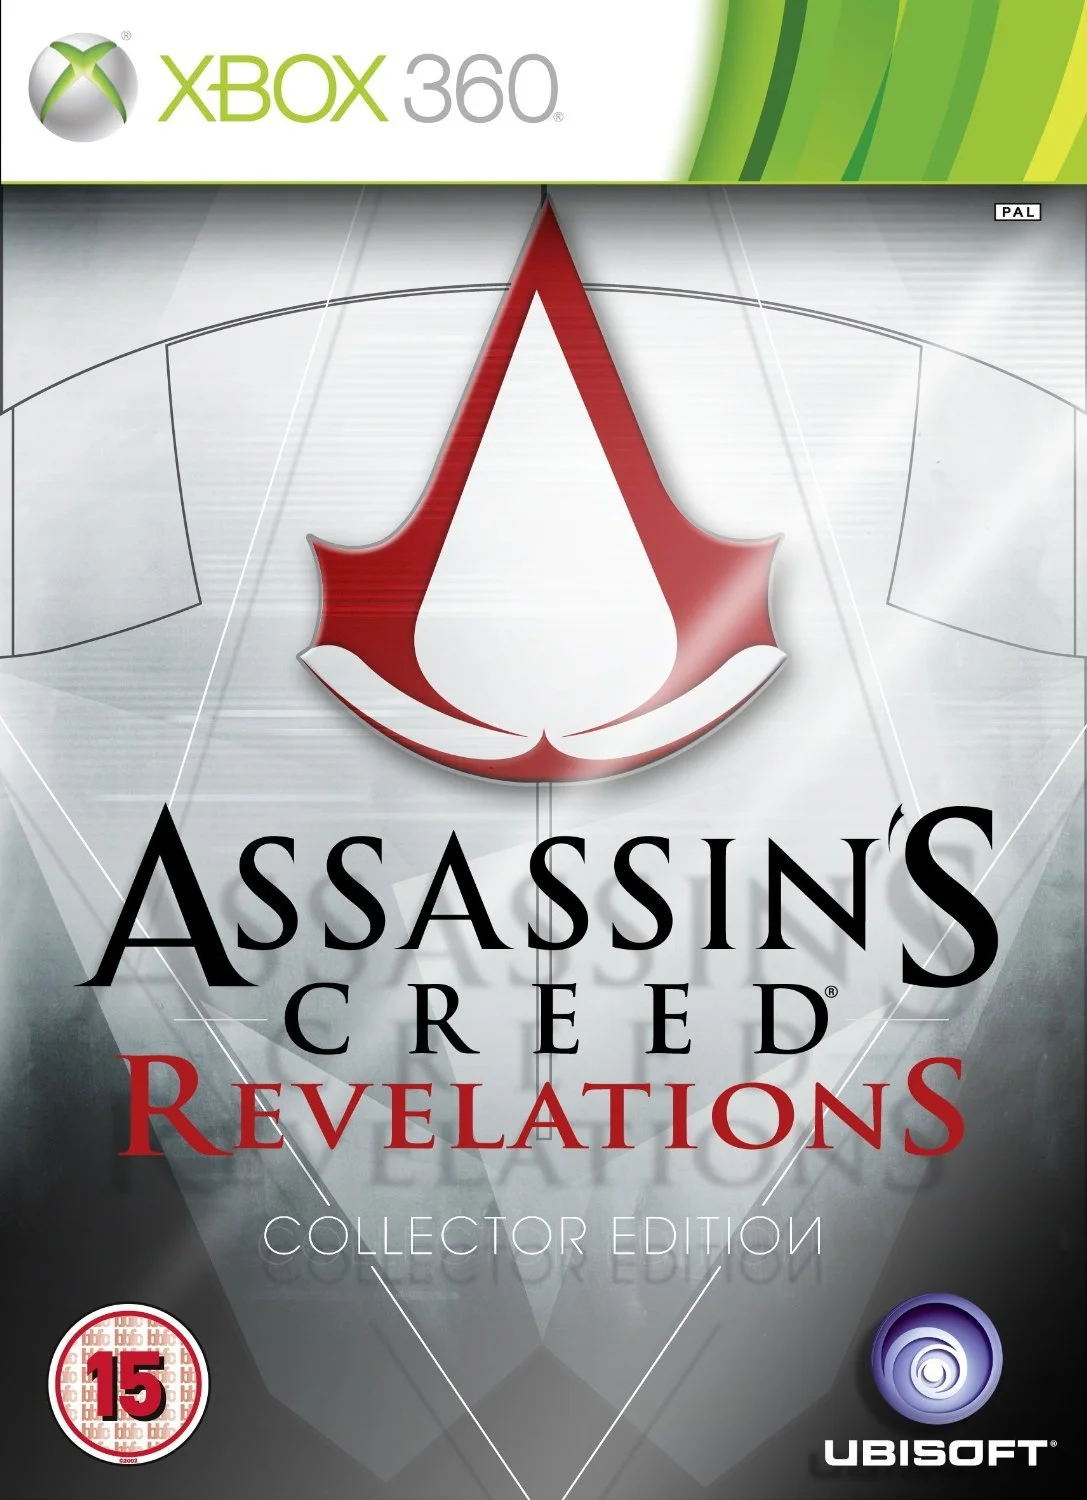 Assassin's Creed Revelations - Collectors Edition